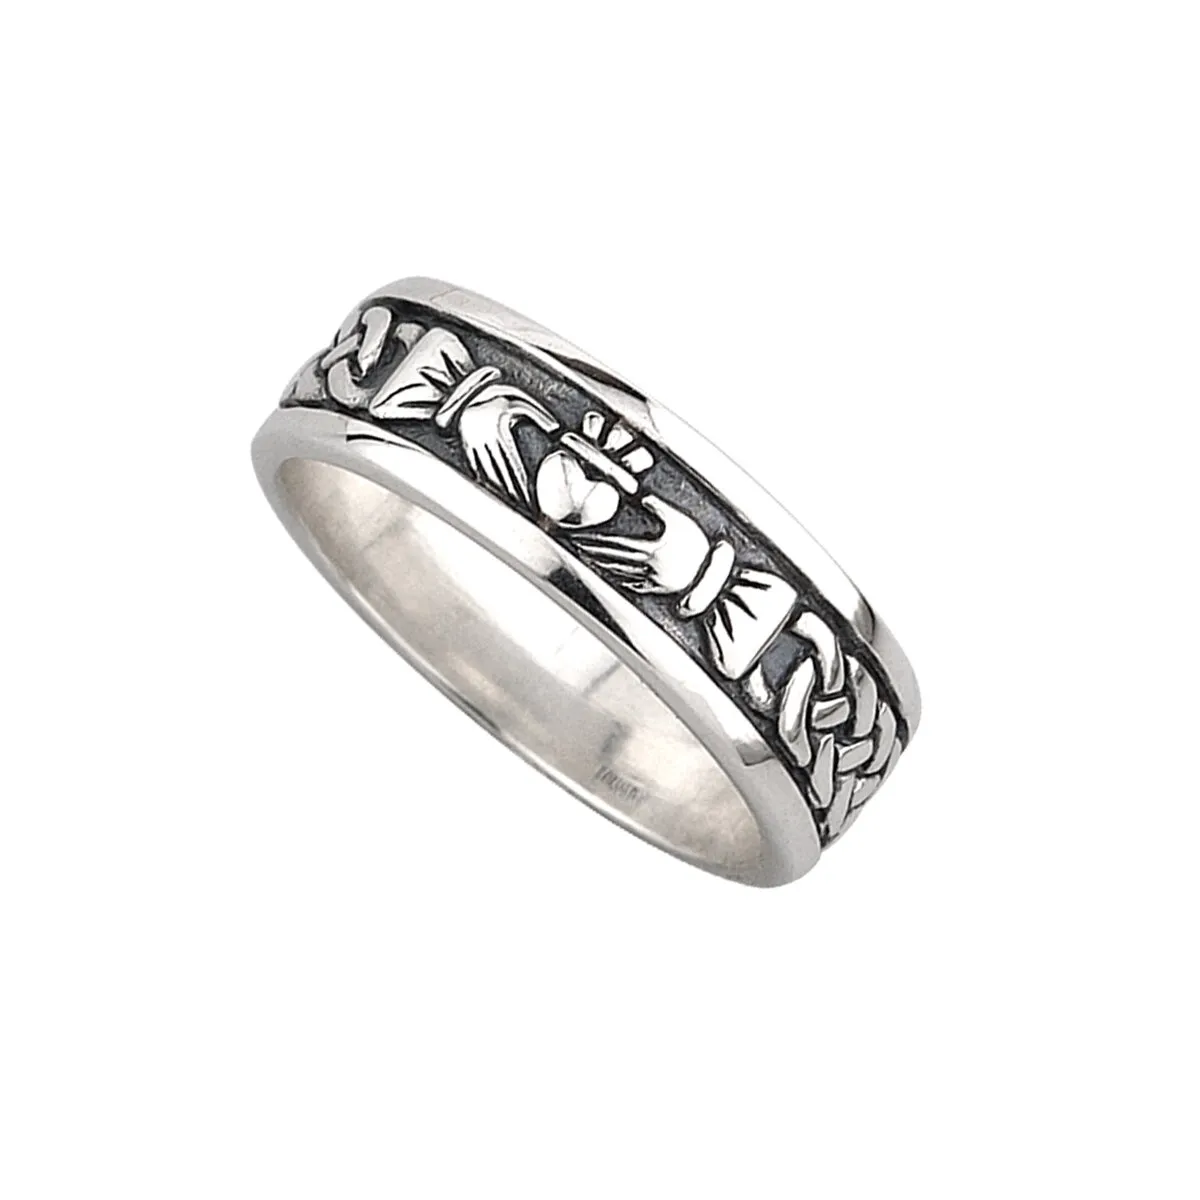 Mens Sterling Silver Oxidised Claddagh Ring0